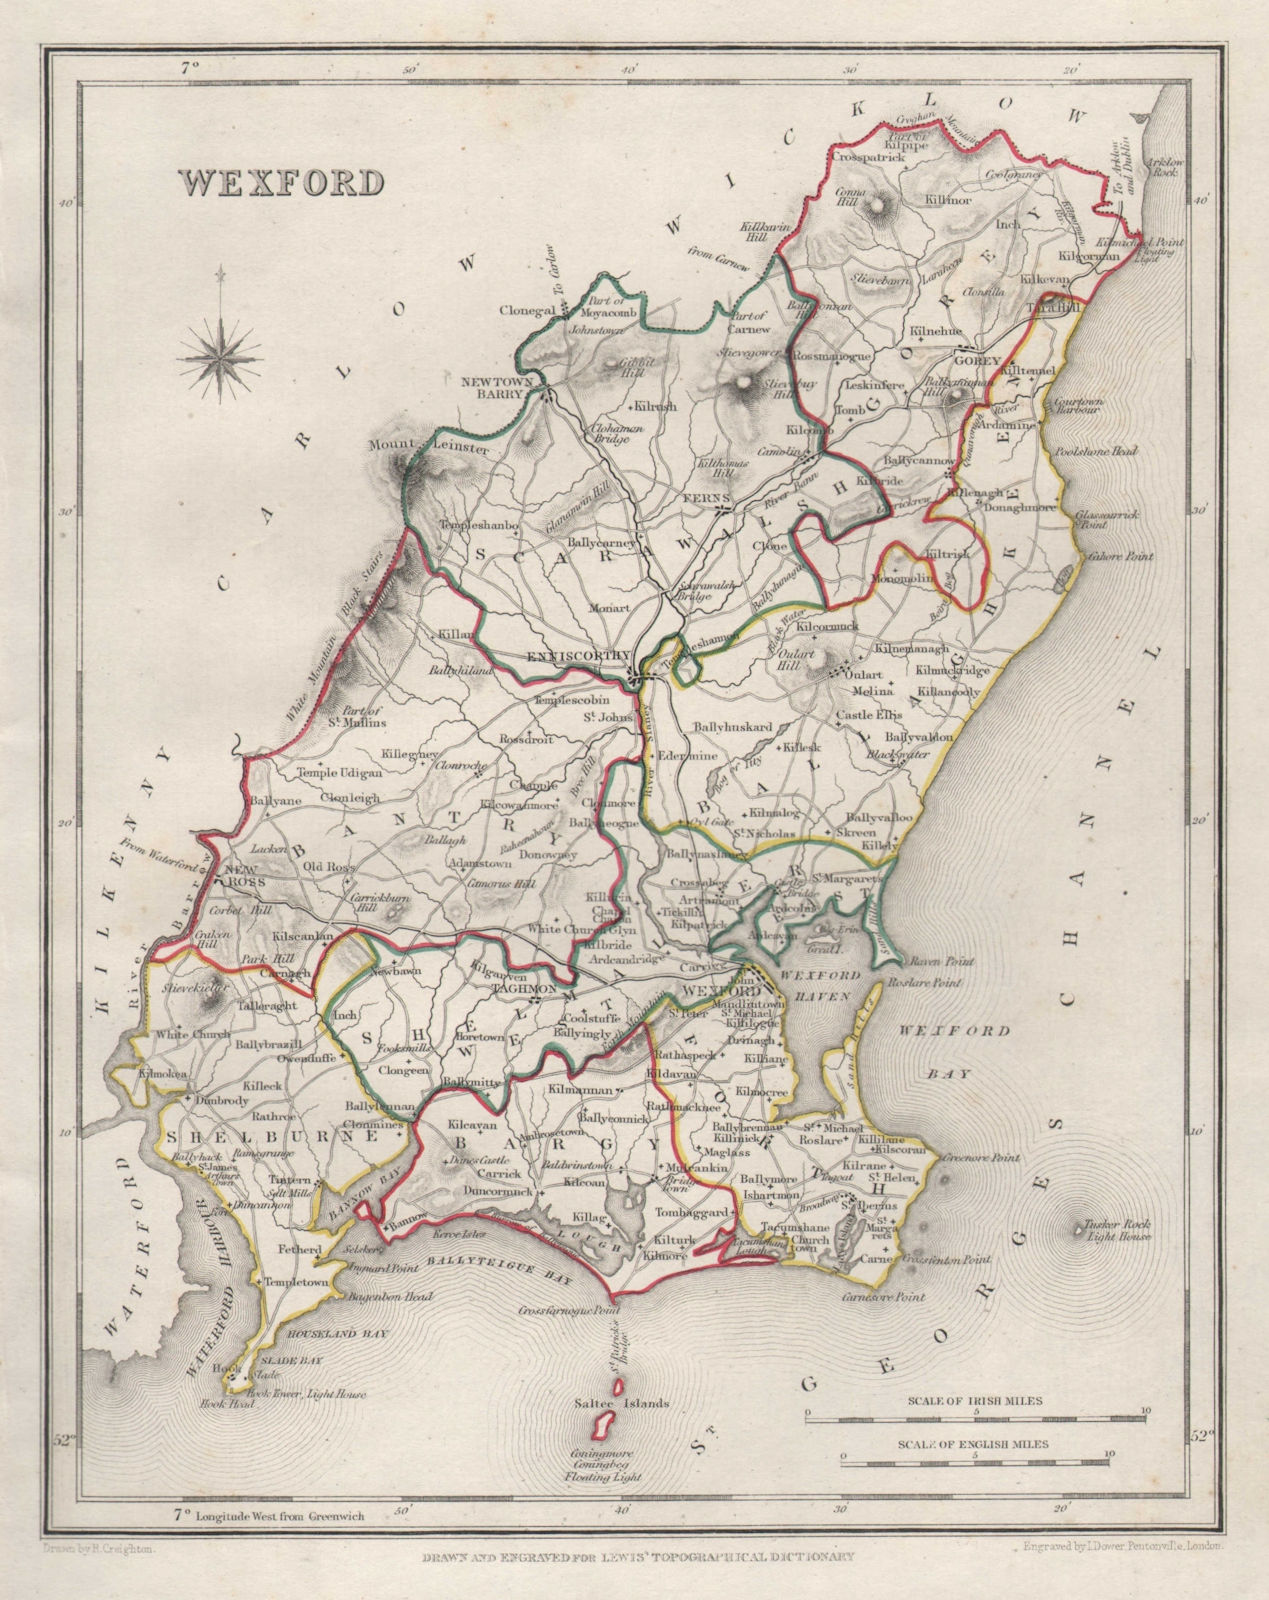 Associate Product COUNTY WEXFORD antique map for LEWIS by CREIGHTON & DOWER. Ireland 1846